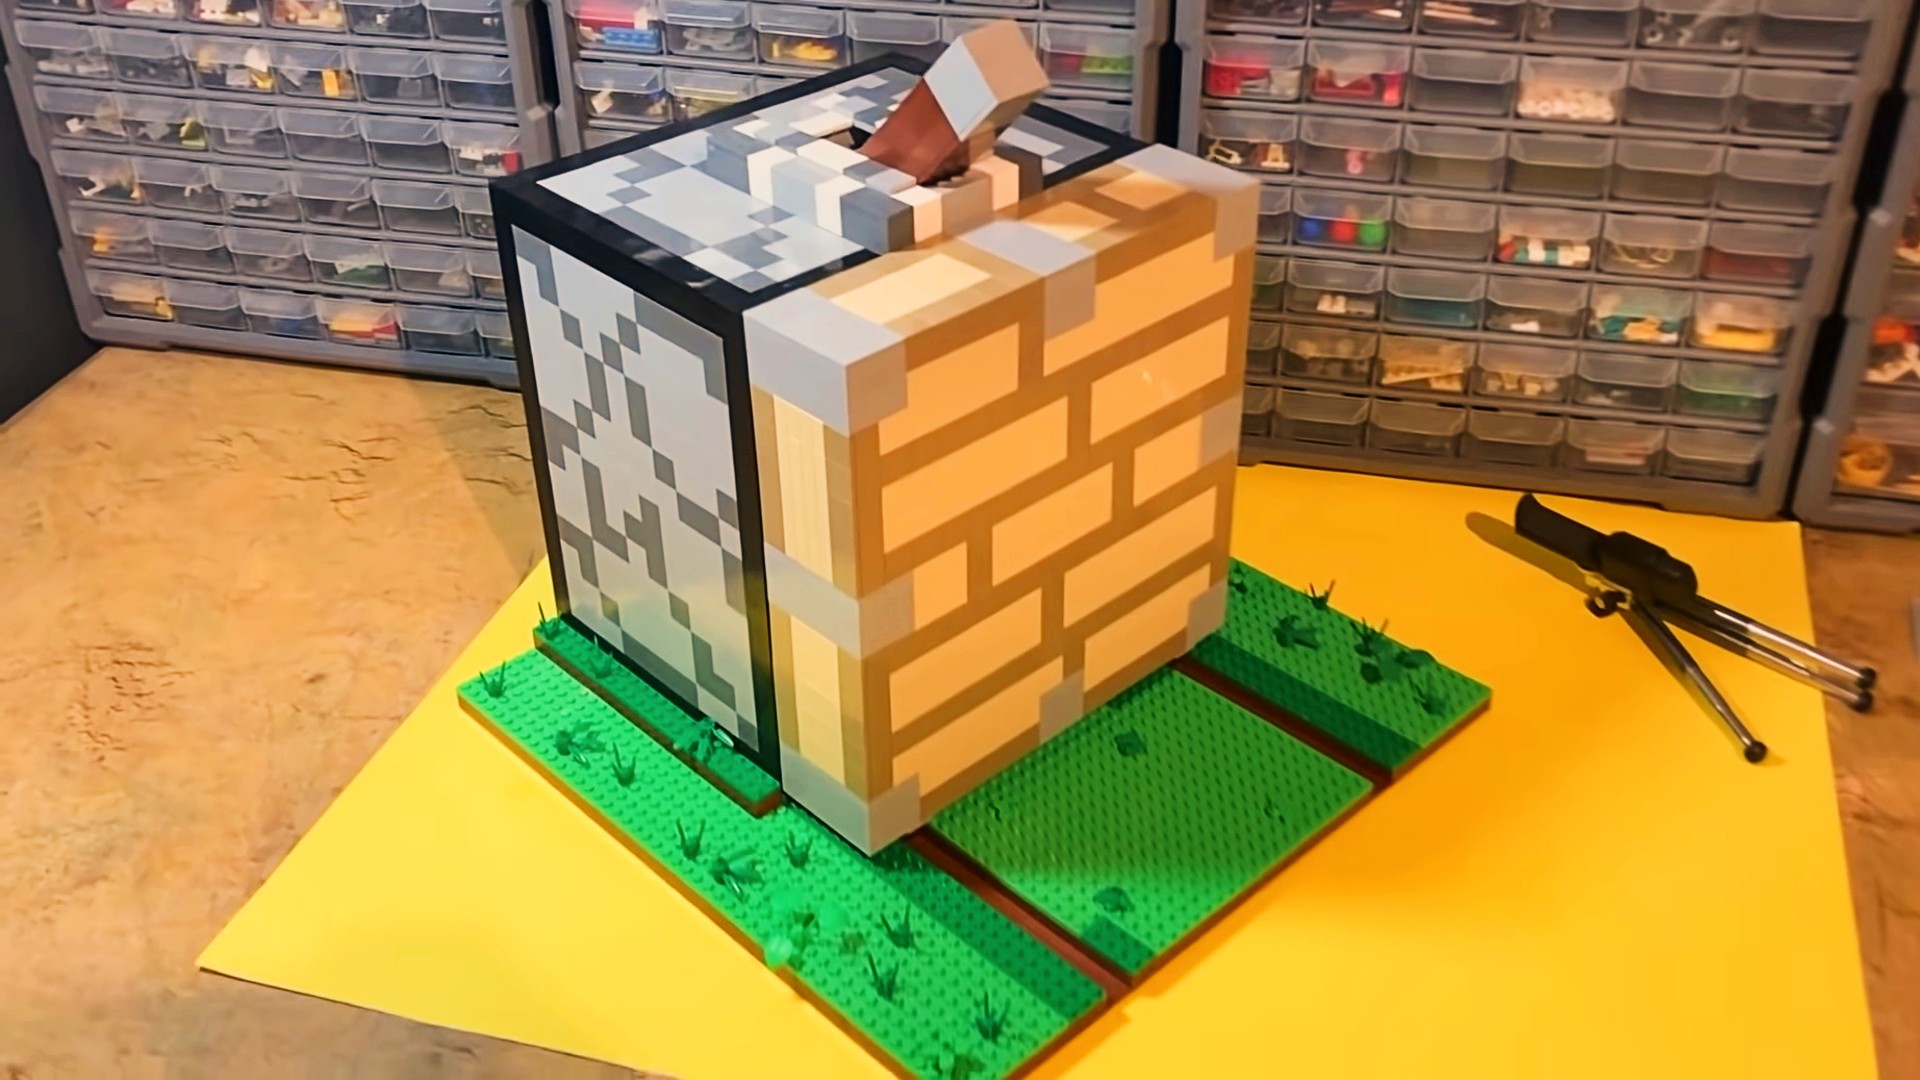 Fan builds Minecraft piston out of Lego